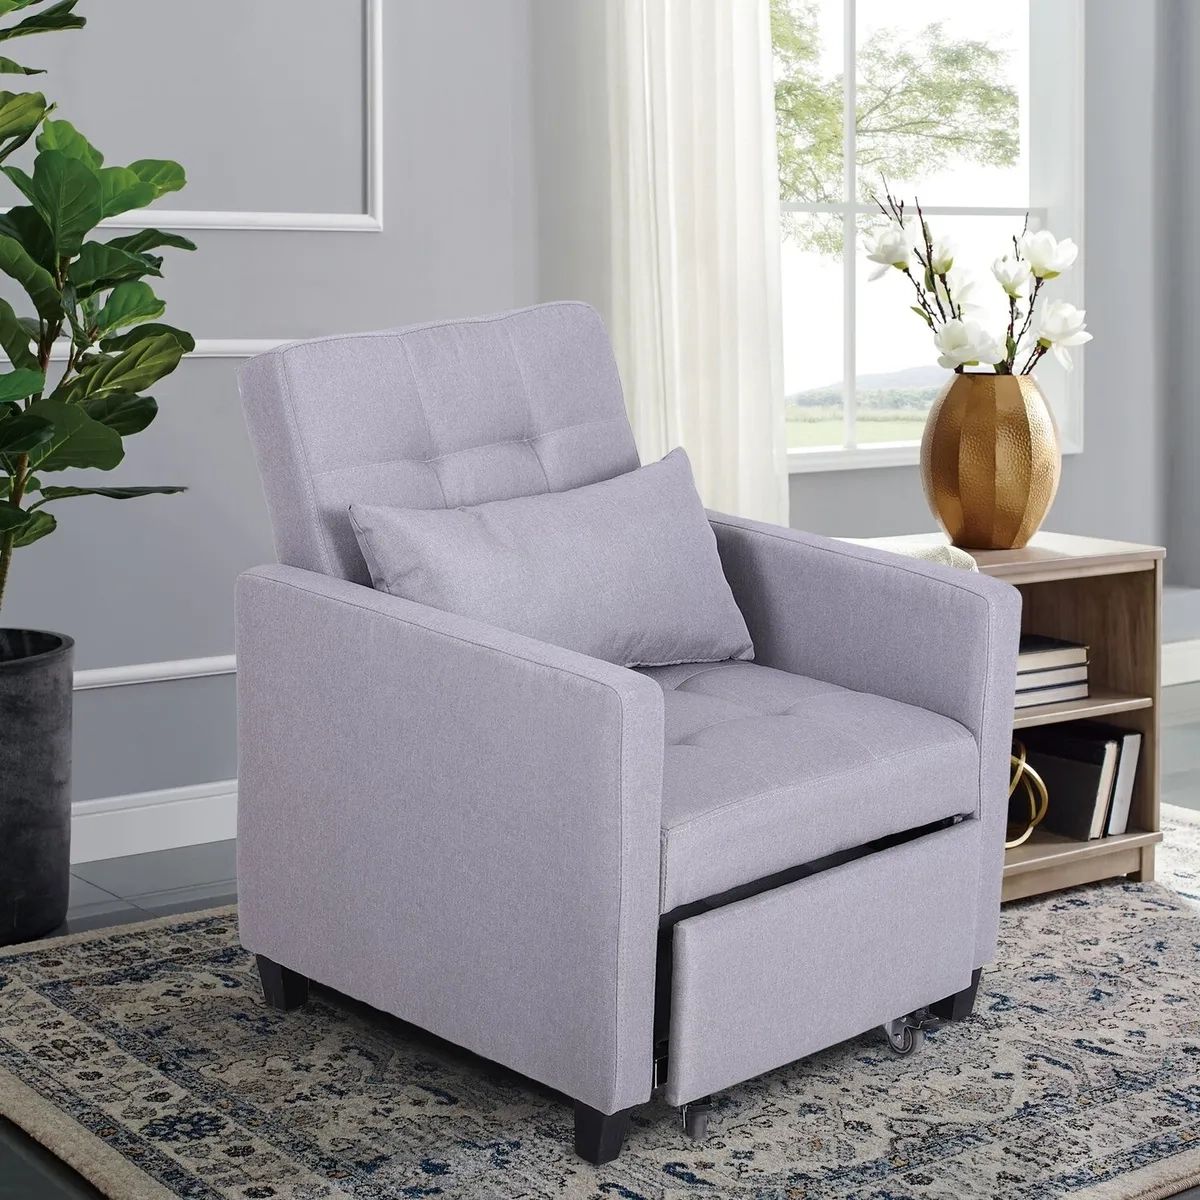 Sofa Bed 3 In 1 Lounger Recliner Chairs Convertible Pull Out Sleeper Chair  Gray | Ebay Inside Convertible Light Gray Chair Beds (Photo 4 of 15)